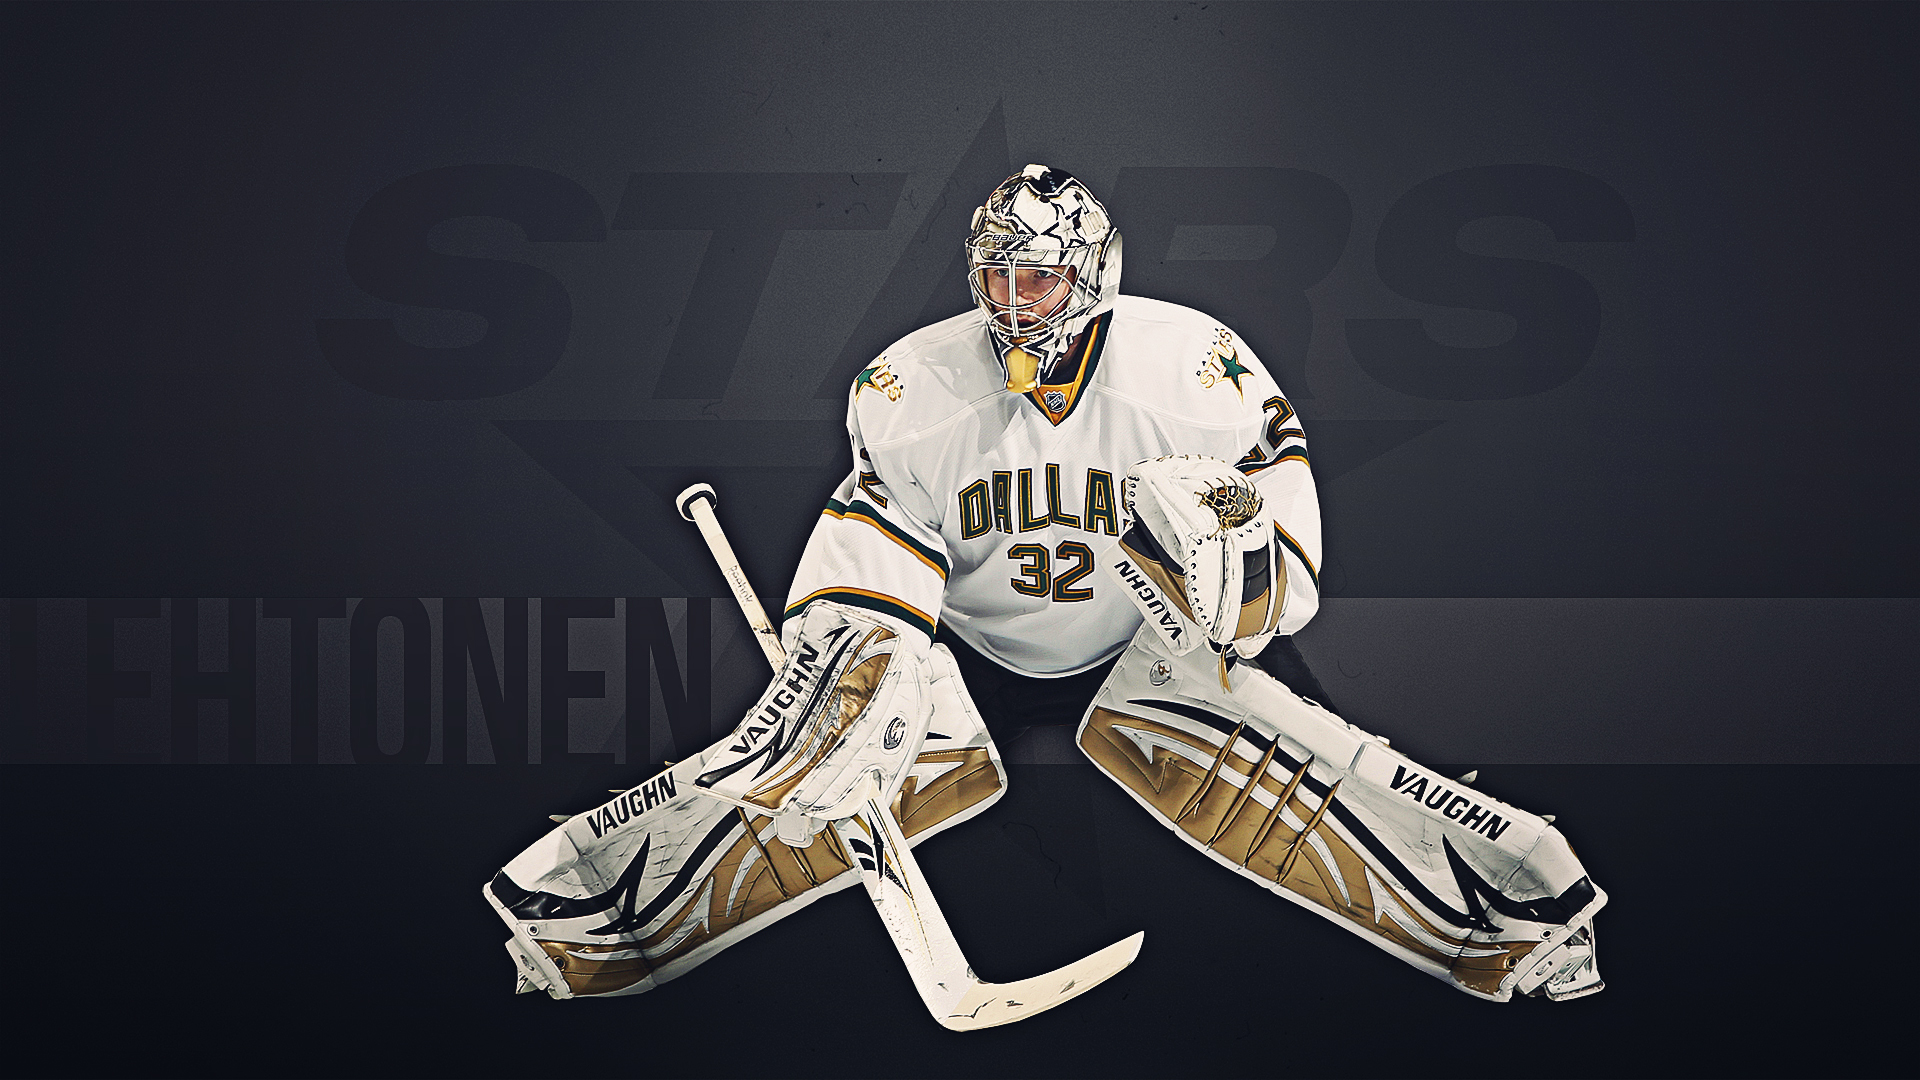 Famous Hockey Player Pekka Rinne Wallpaper And Image